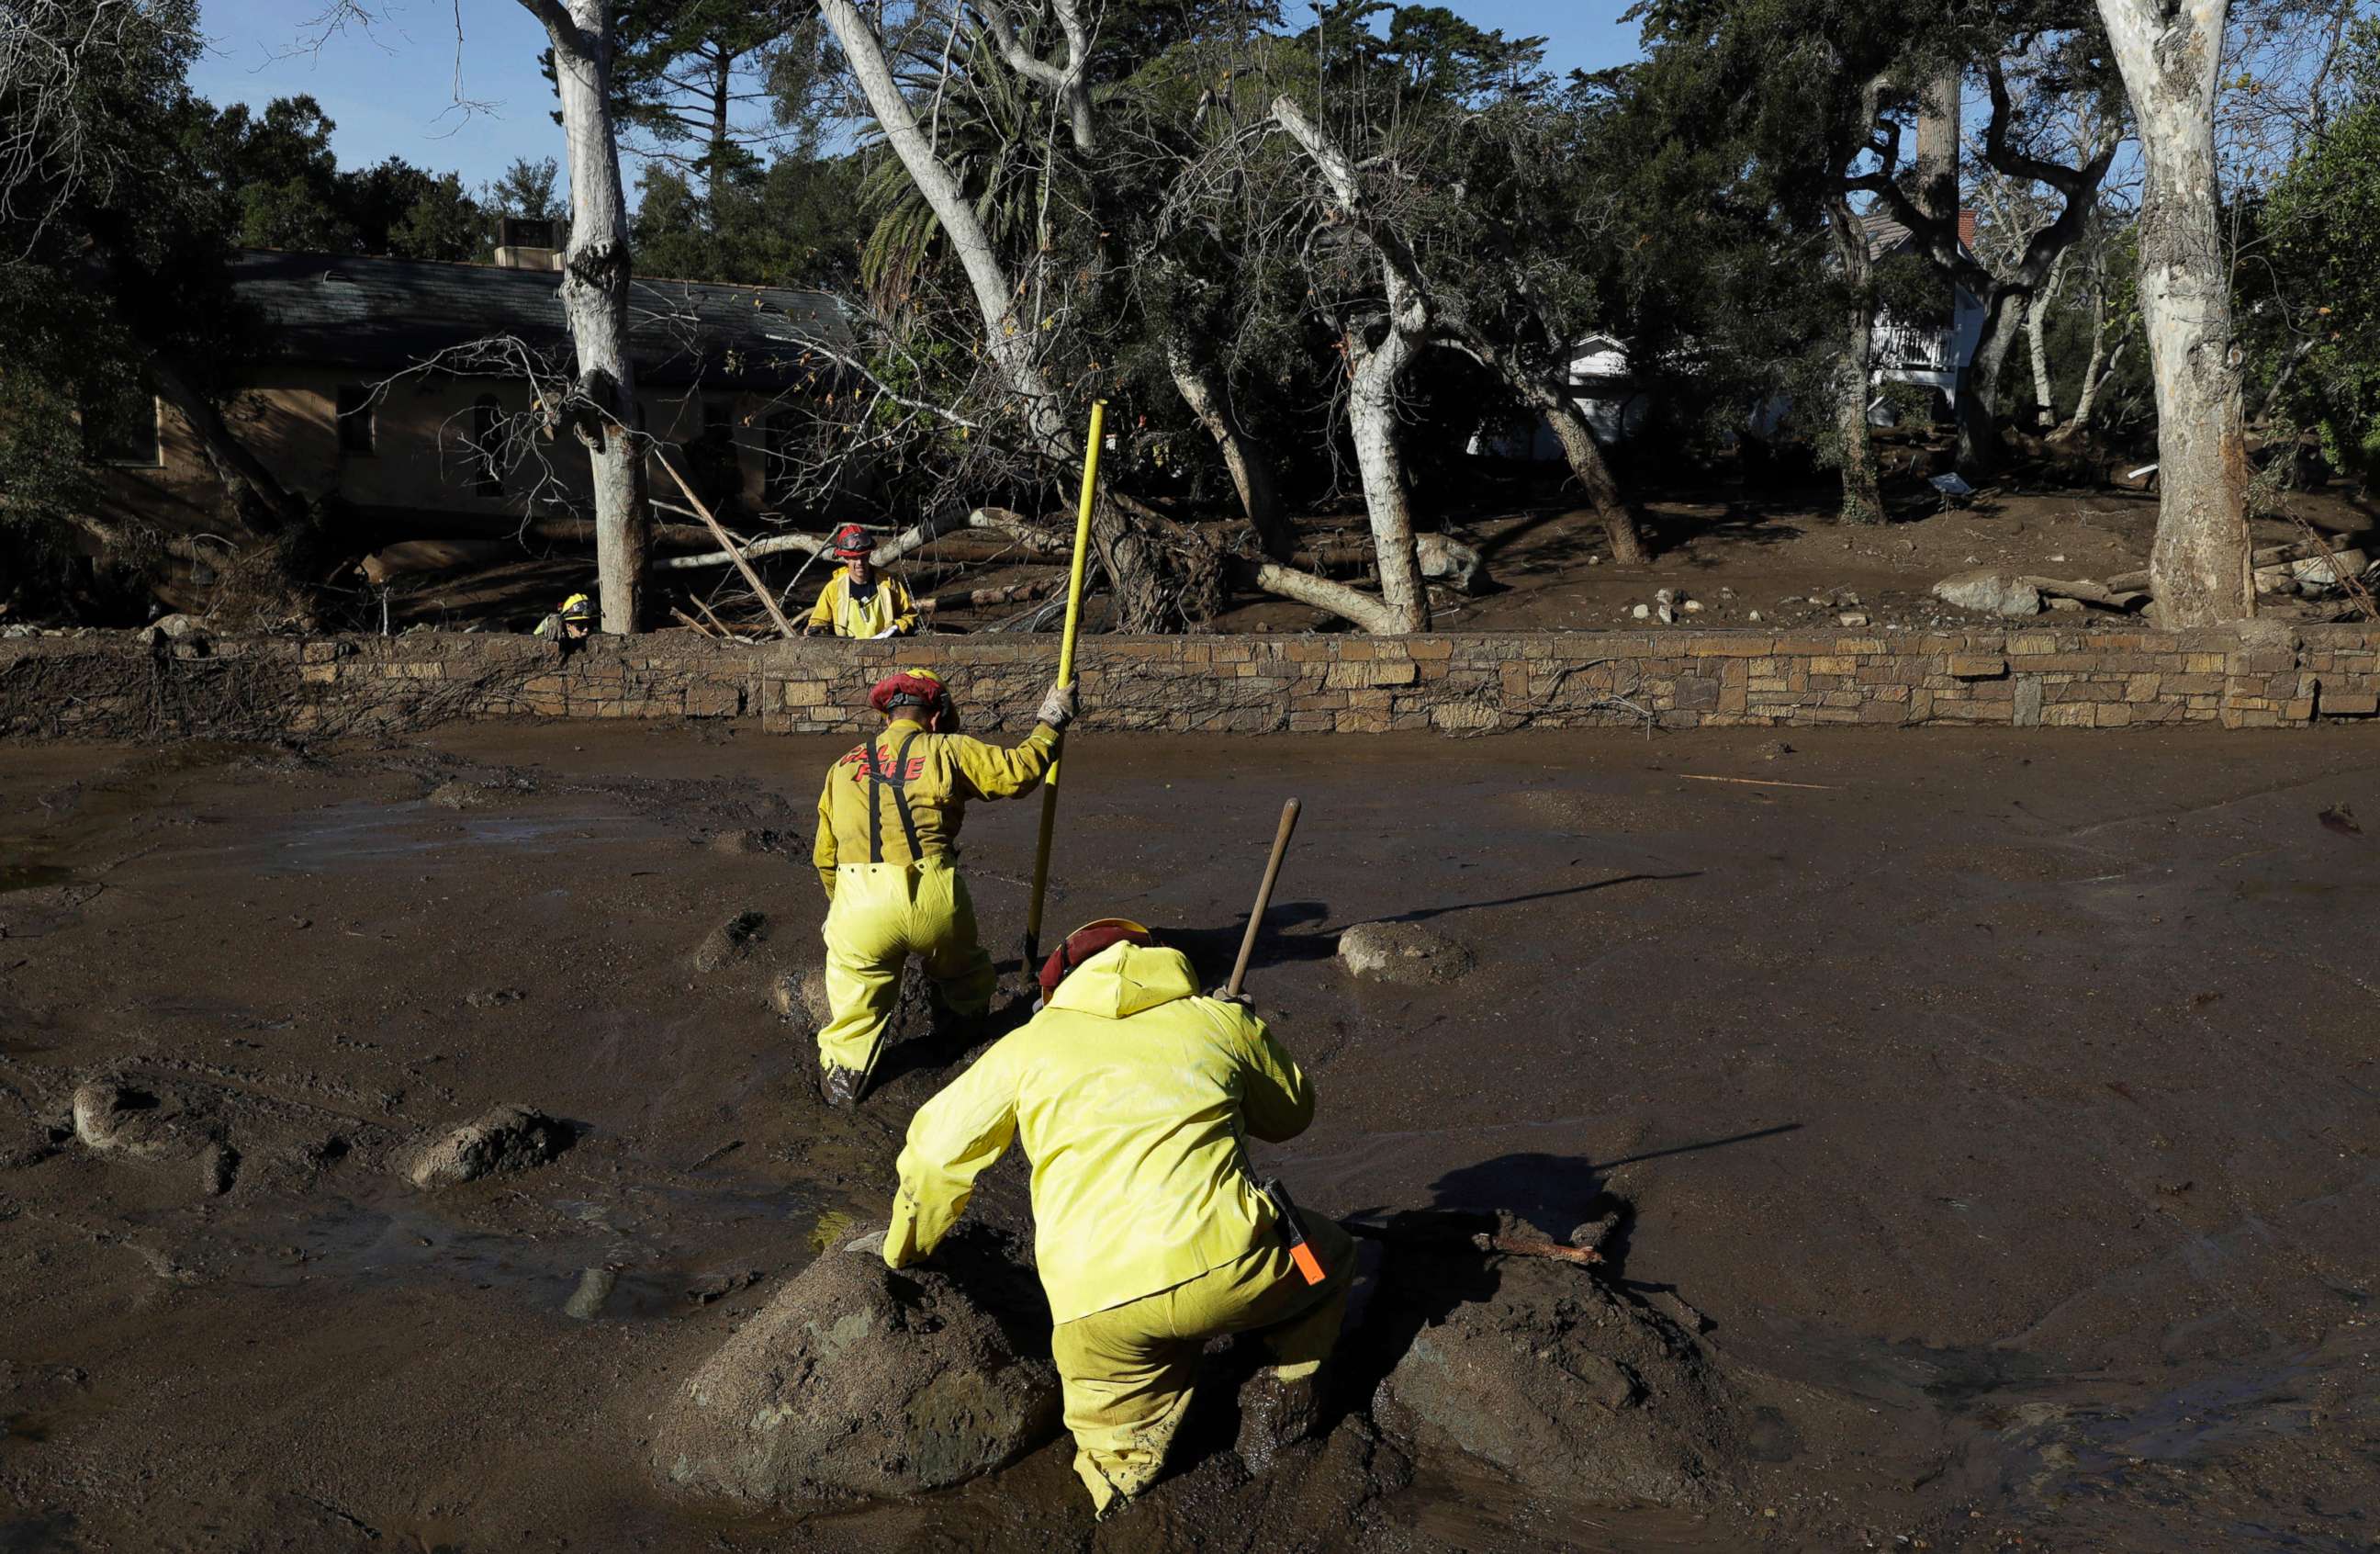 PHOTO: A Cal Fire search and rescue crew walks through mud near homes damaged by storms in Montecito, Calif., Jan. 12, 2018. The mudslide, touched off by heavy rain, took many homeowners by surprise early despite warnings issued days in advance.
